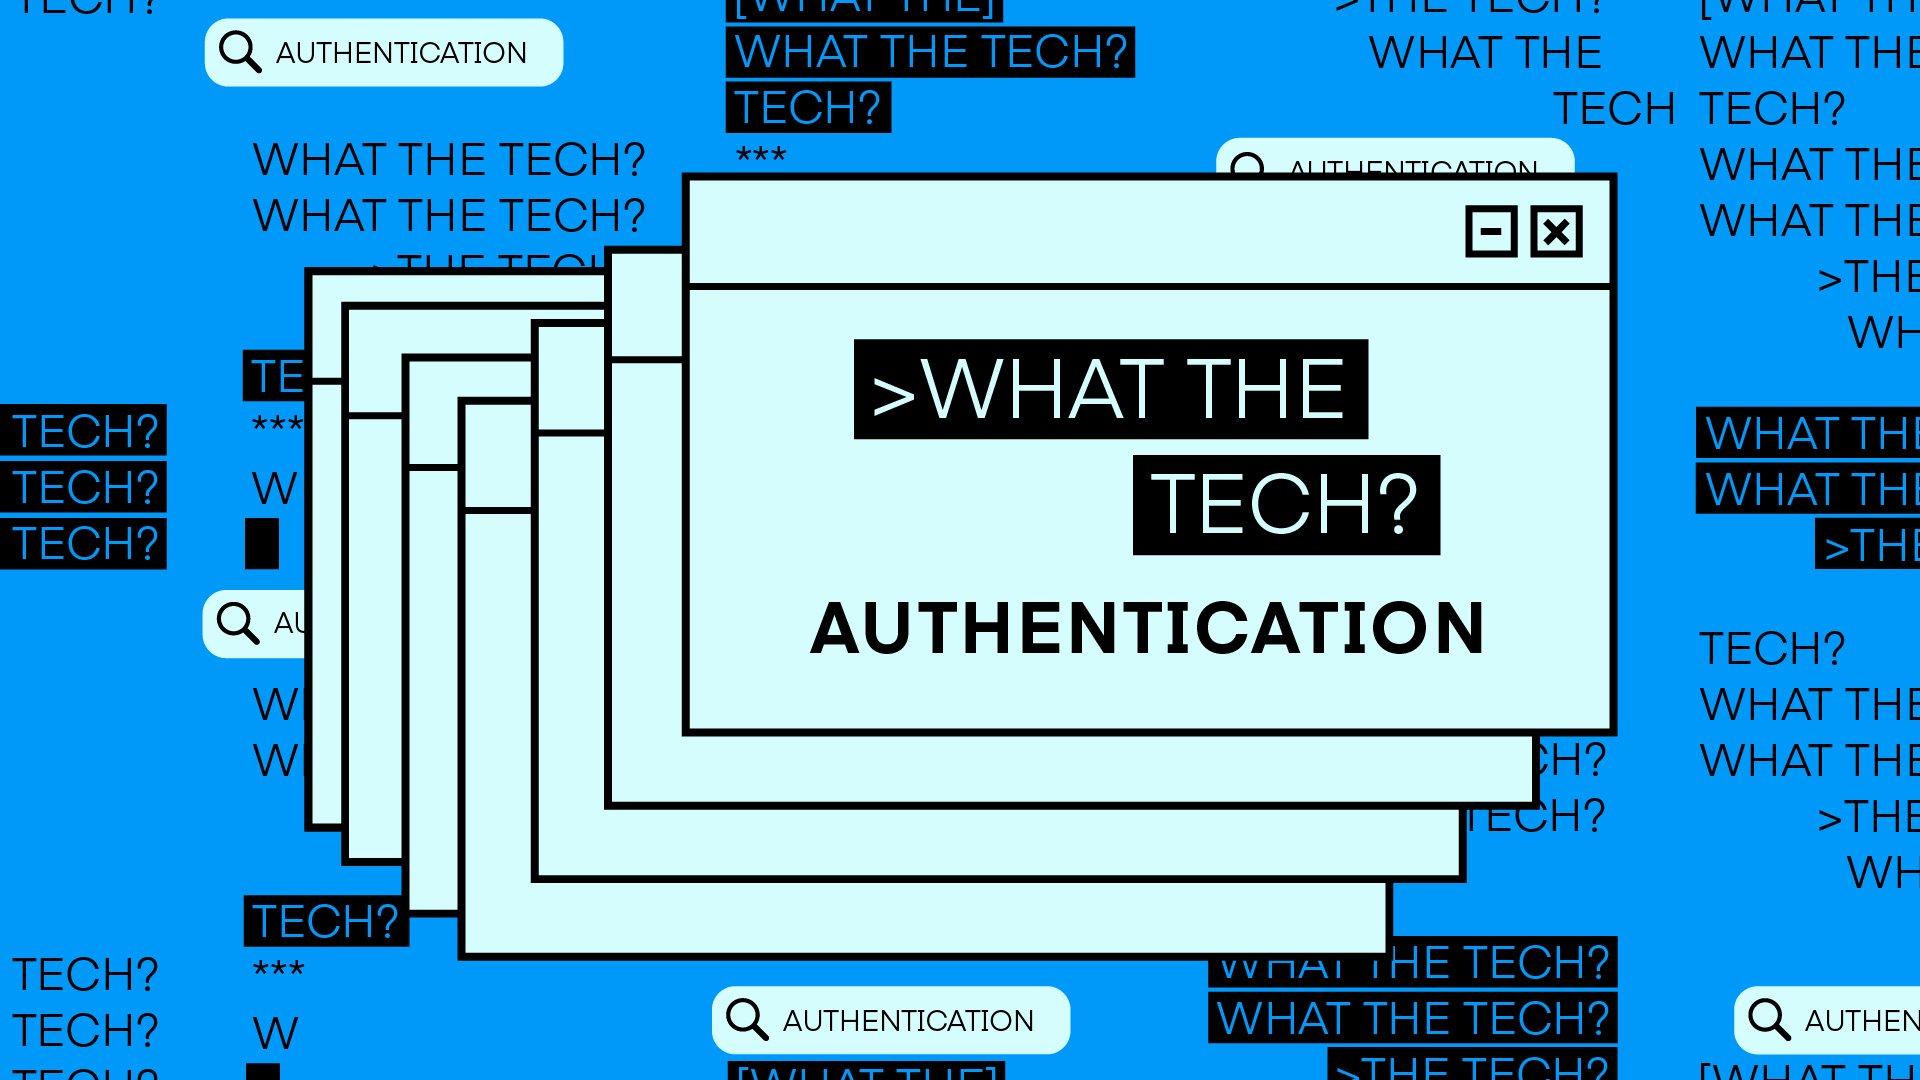 What the Tech is Authentication?